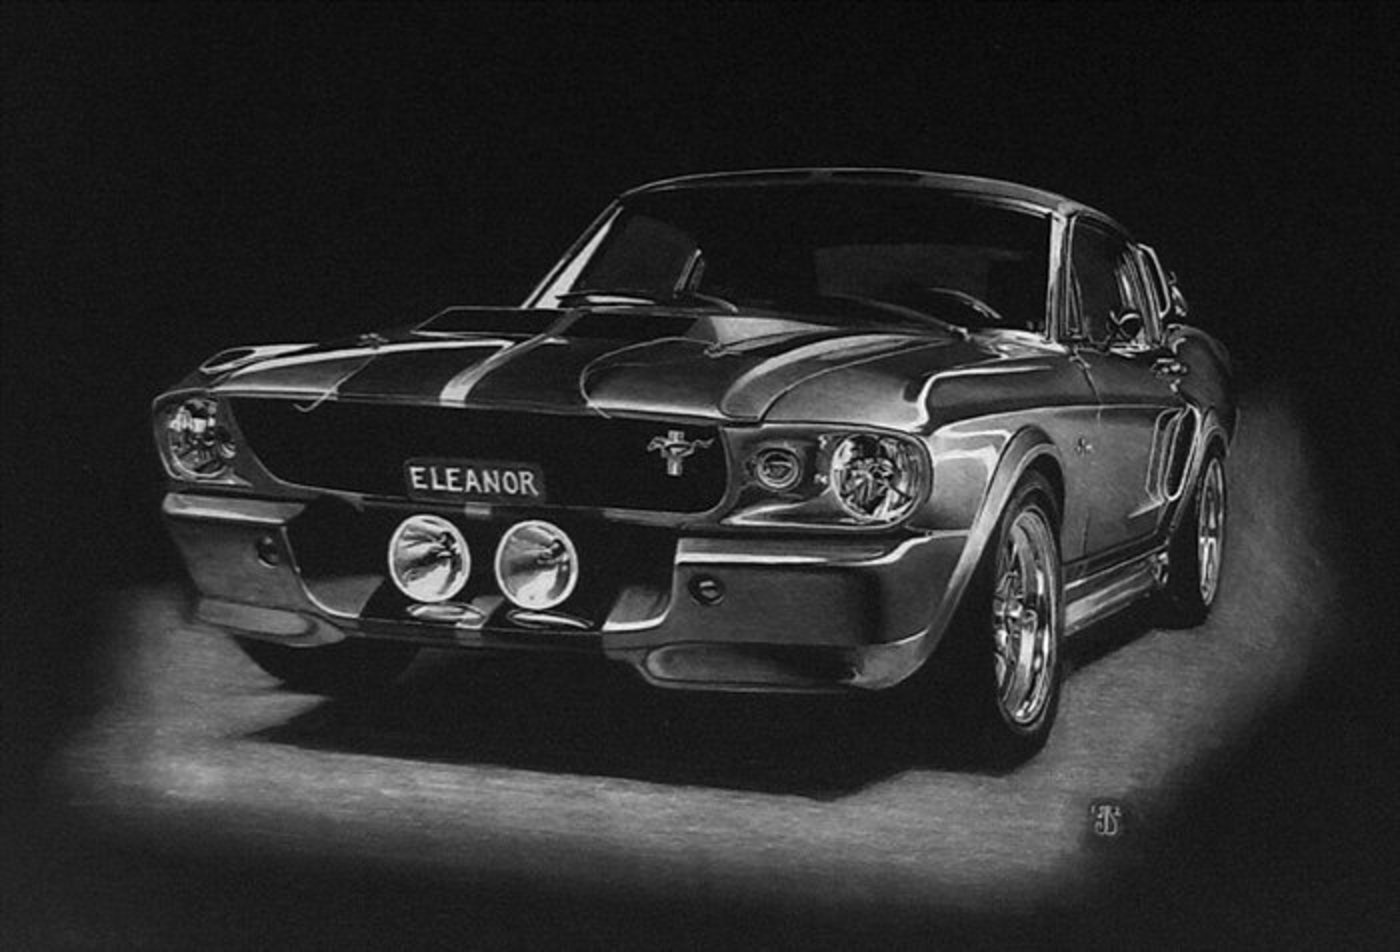 automobile - 1967 Ford Shelby Mustang GT500E ("Eleanor") by Jim ...